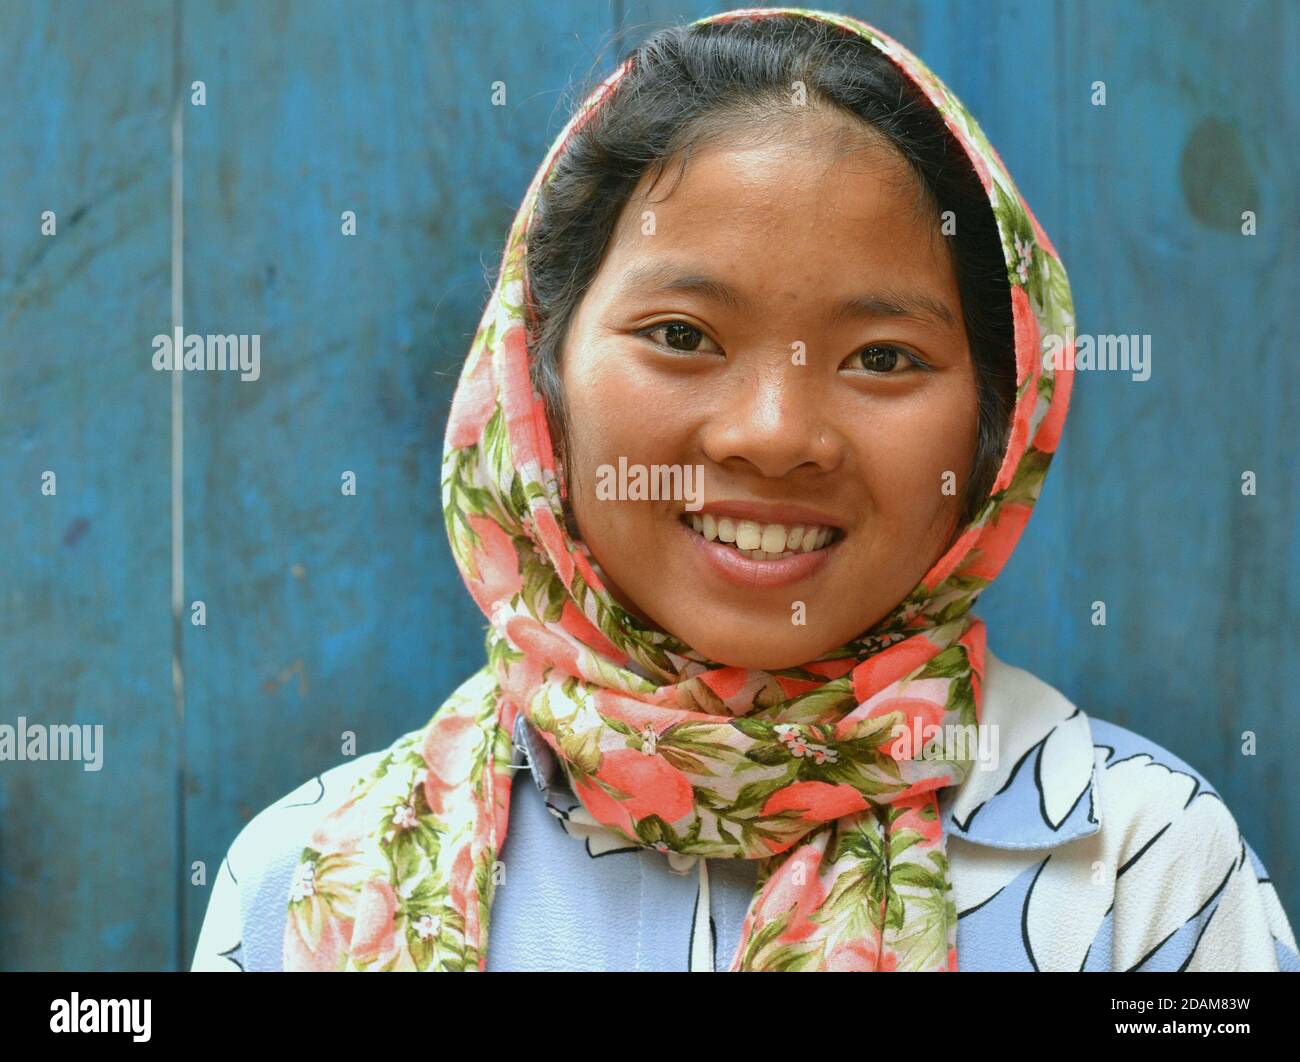 Pretty Northeast Indian Apatani pre-teen girl wears a colorful head scarf and smiles for the camera in front of blue wooden door background. Stock Photo